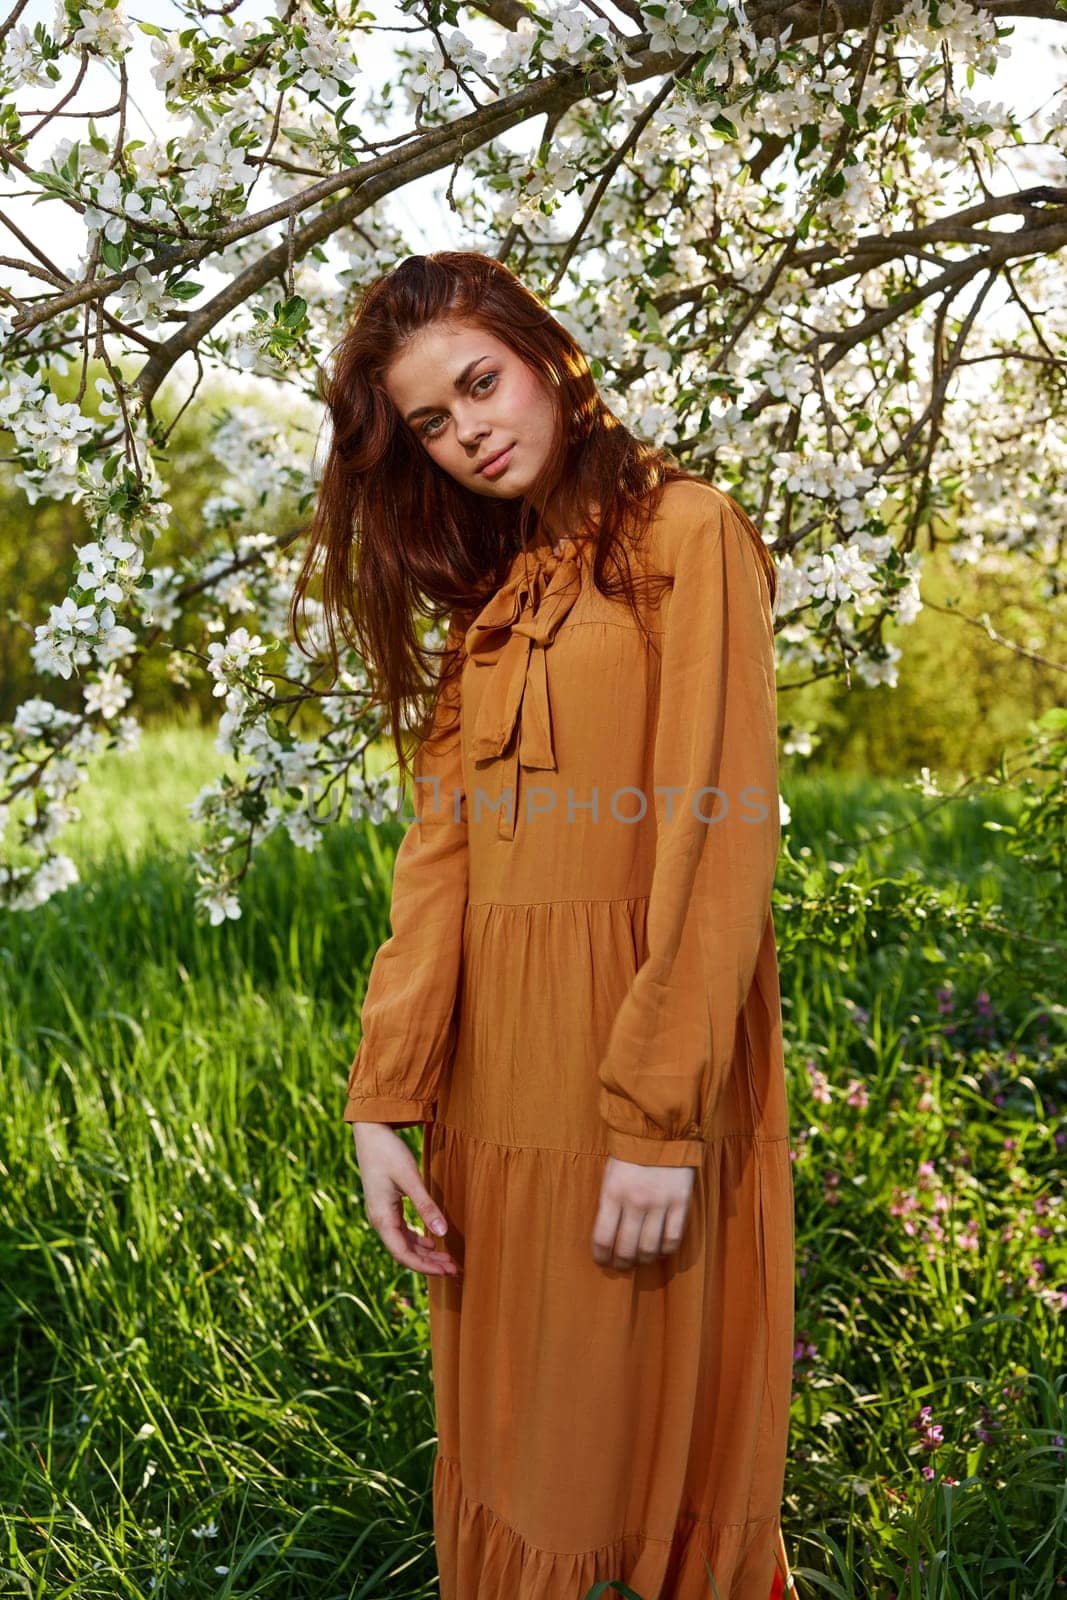 a bright vertical photo of an attractive woman in a long, stylish orange dress standing next to a flowering tree in sunny, warm weather, looking pleasantly into the camera, illuminated from the side. High quality photo